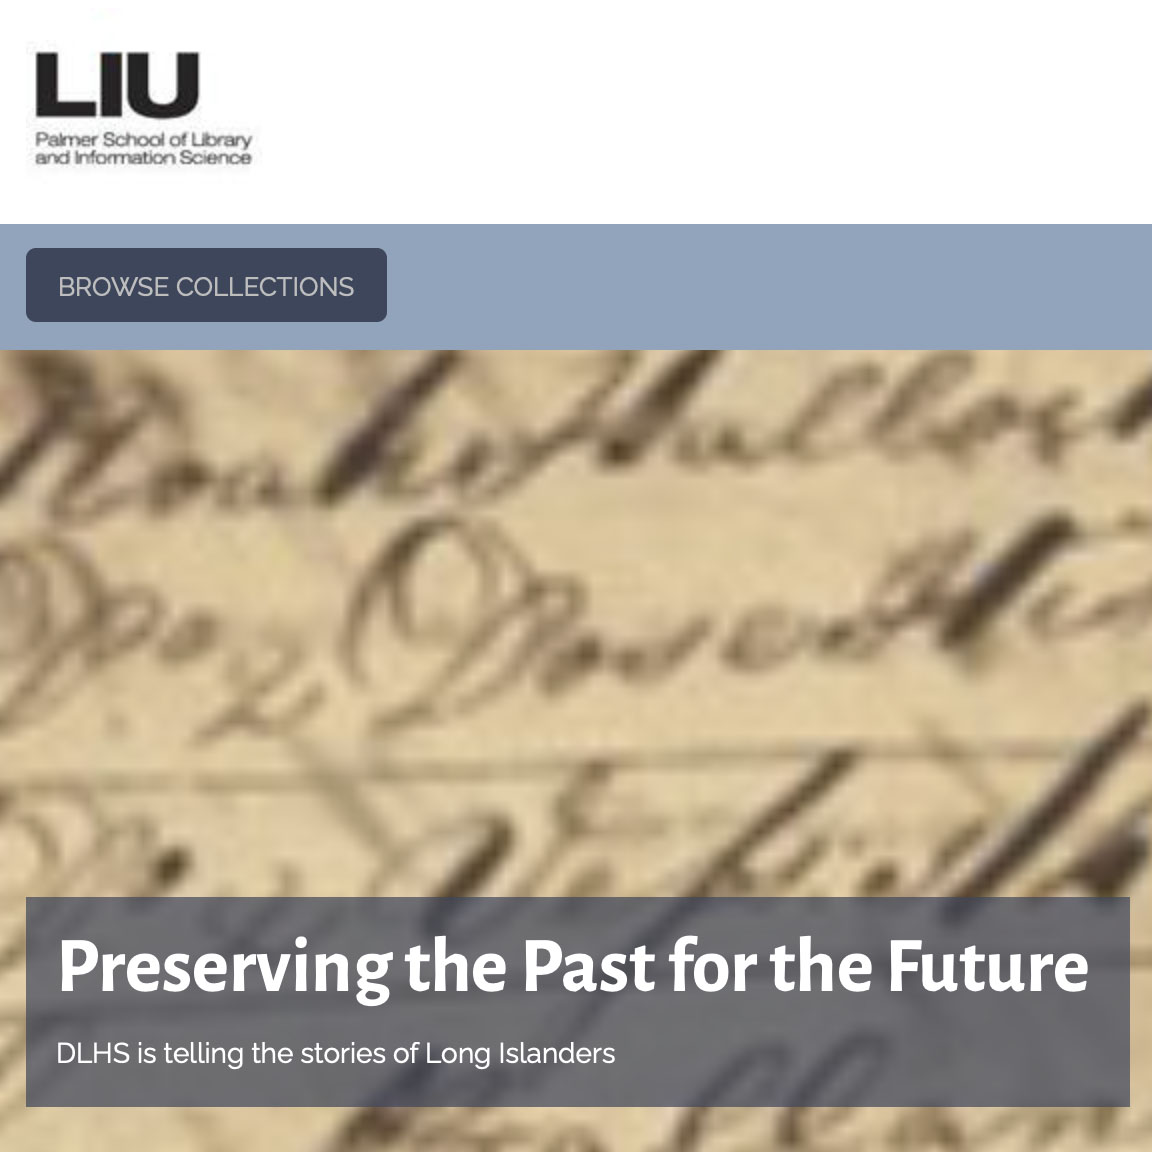 NOW AVAILABLE: LIU's “Digitizing Local History Sources”